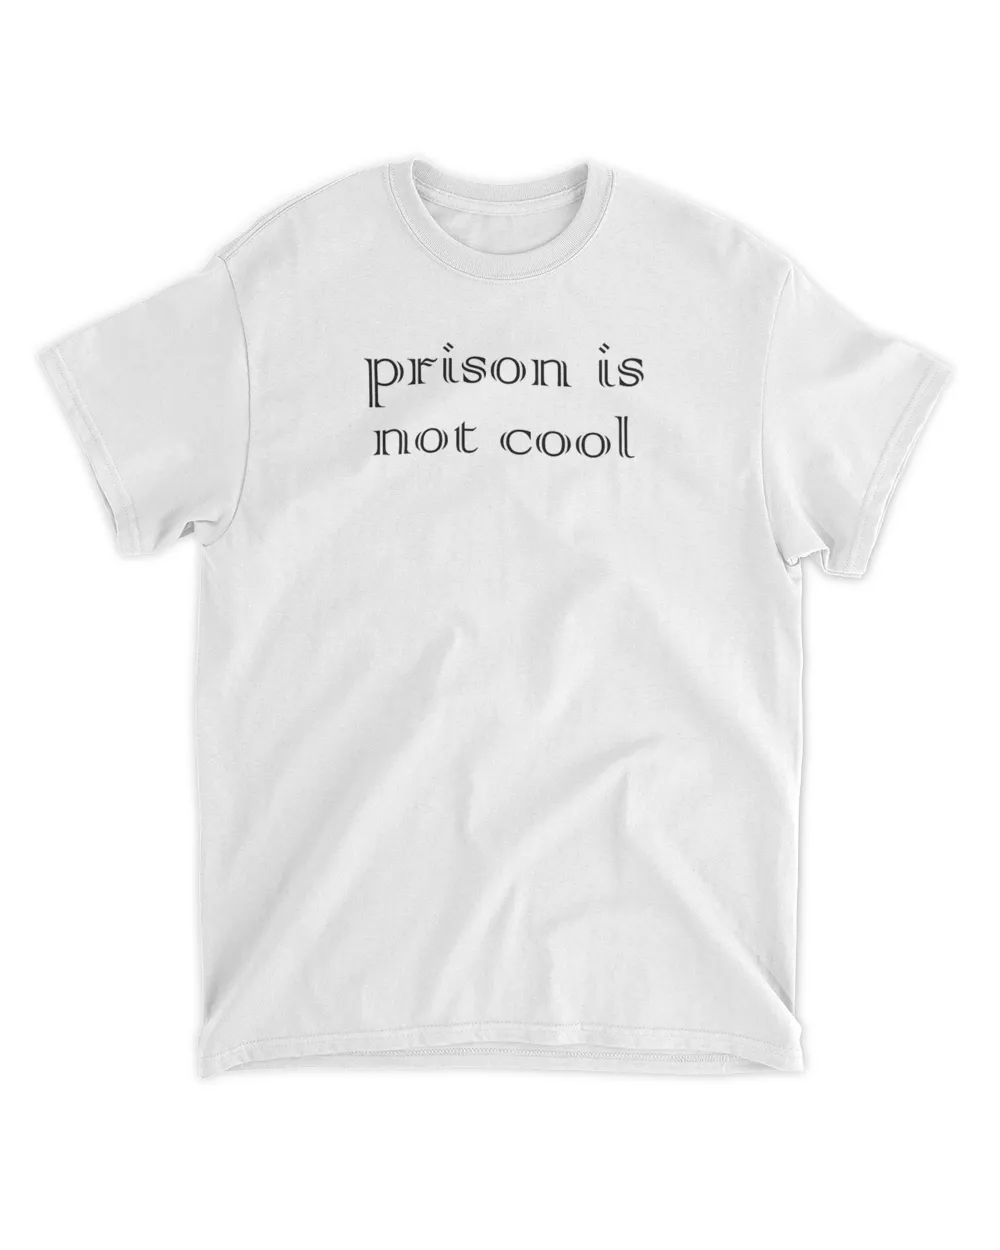 Prison Is Not Cool Shirt